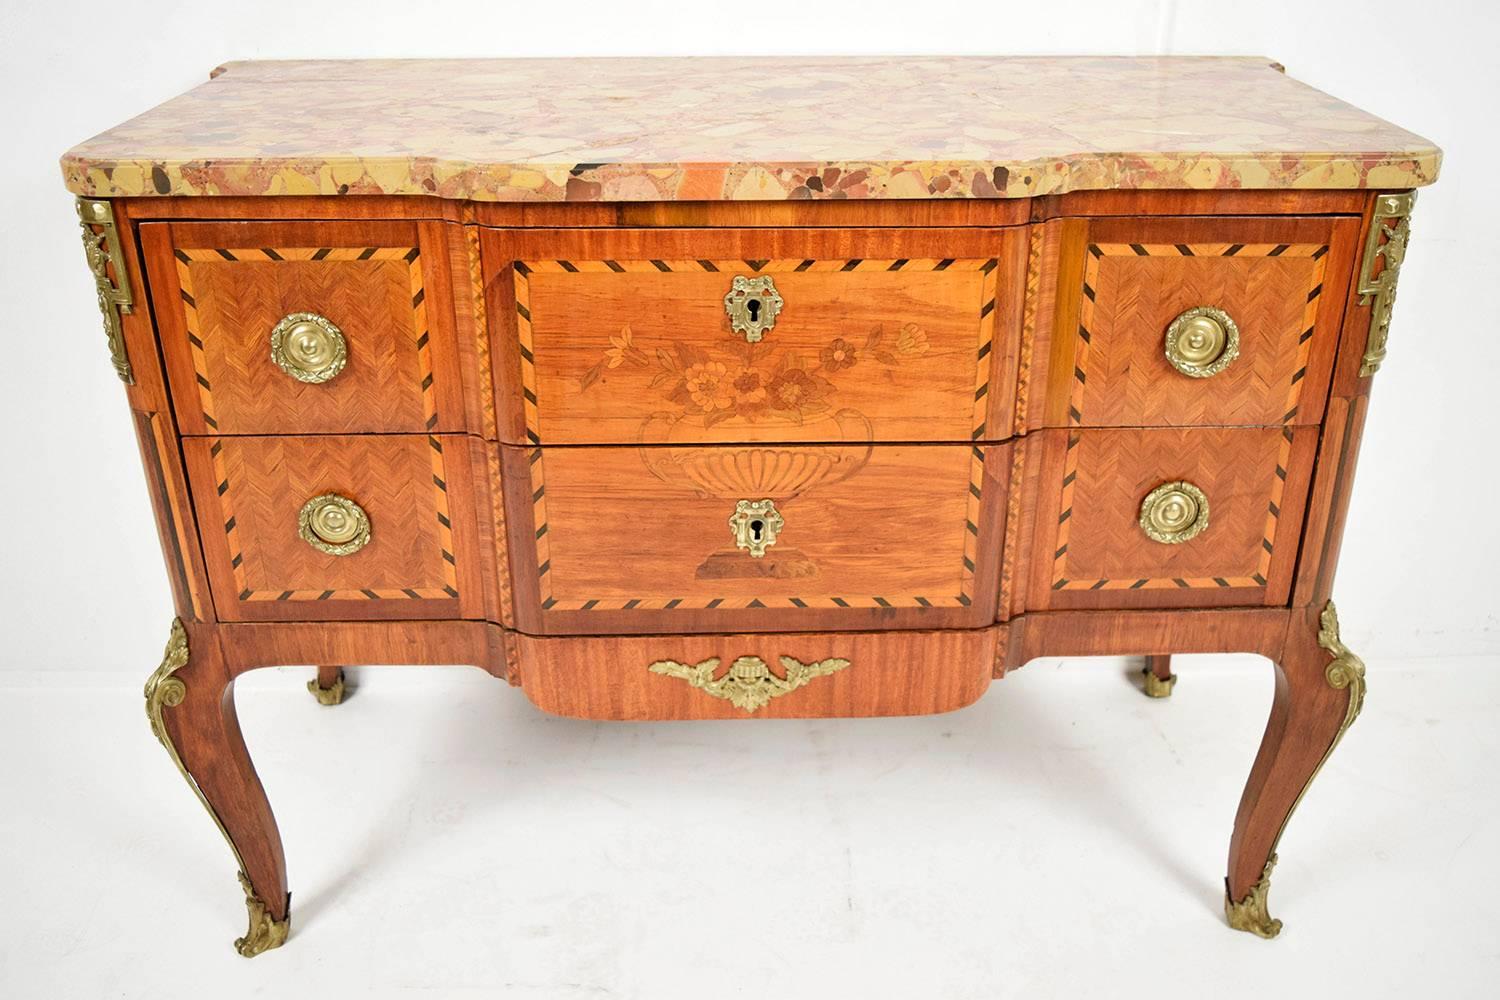 This is an unique circa 1880's French Louis XVI-style chest of drawers. It features the original multicolored beveled marble-top. The solid wood desk is covered with elegant marquetry and inlaid designs. The two front drawers have inlaid design on